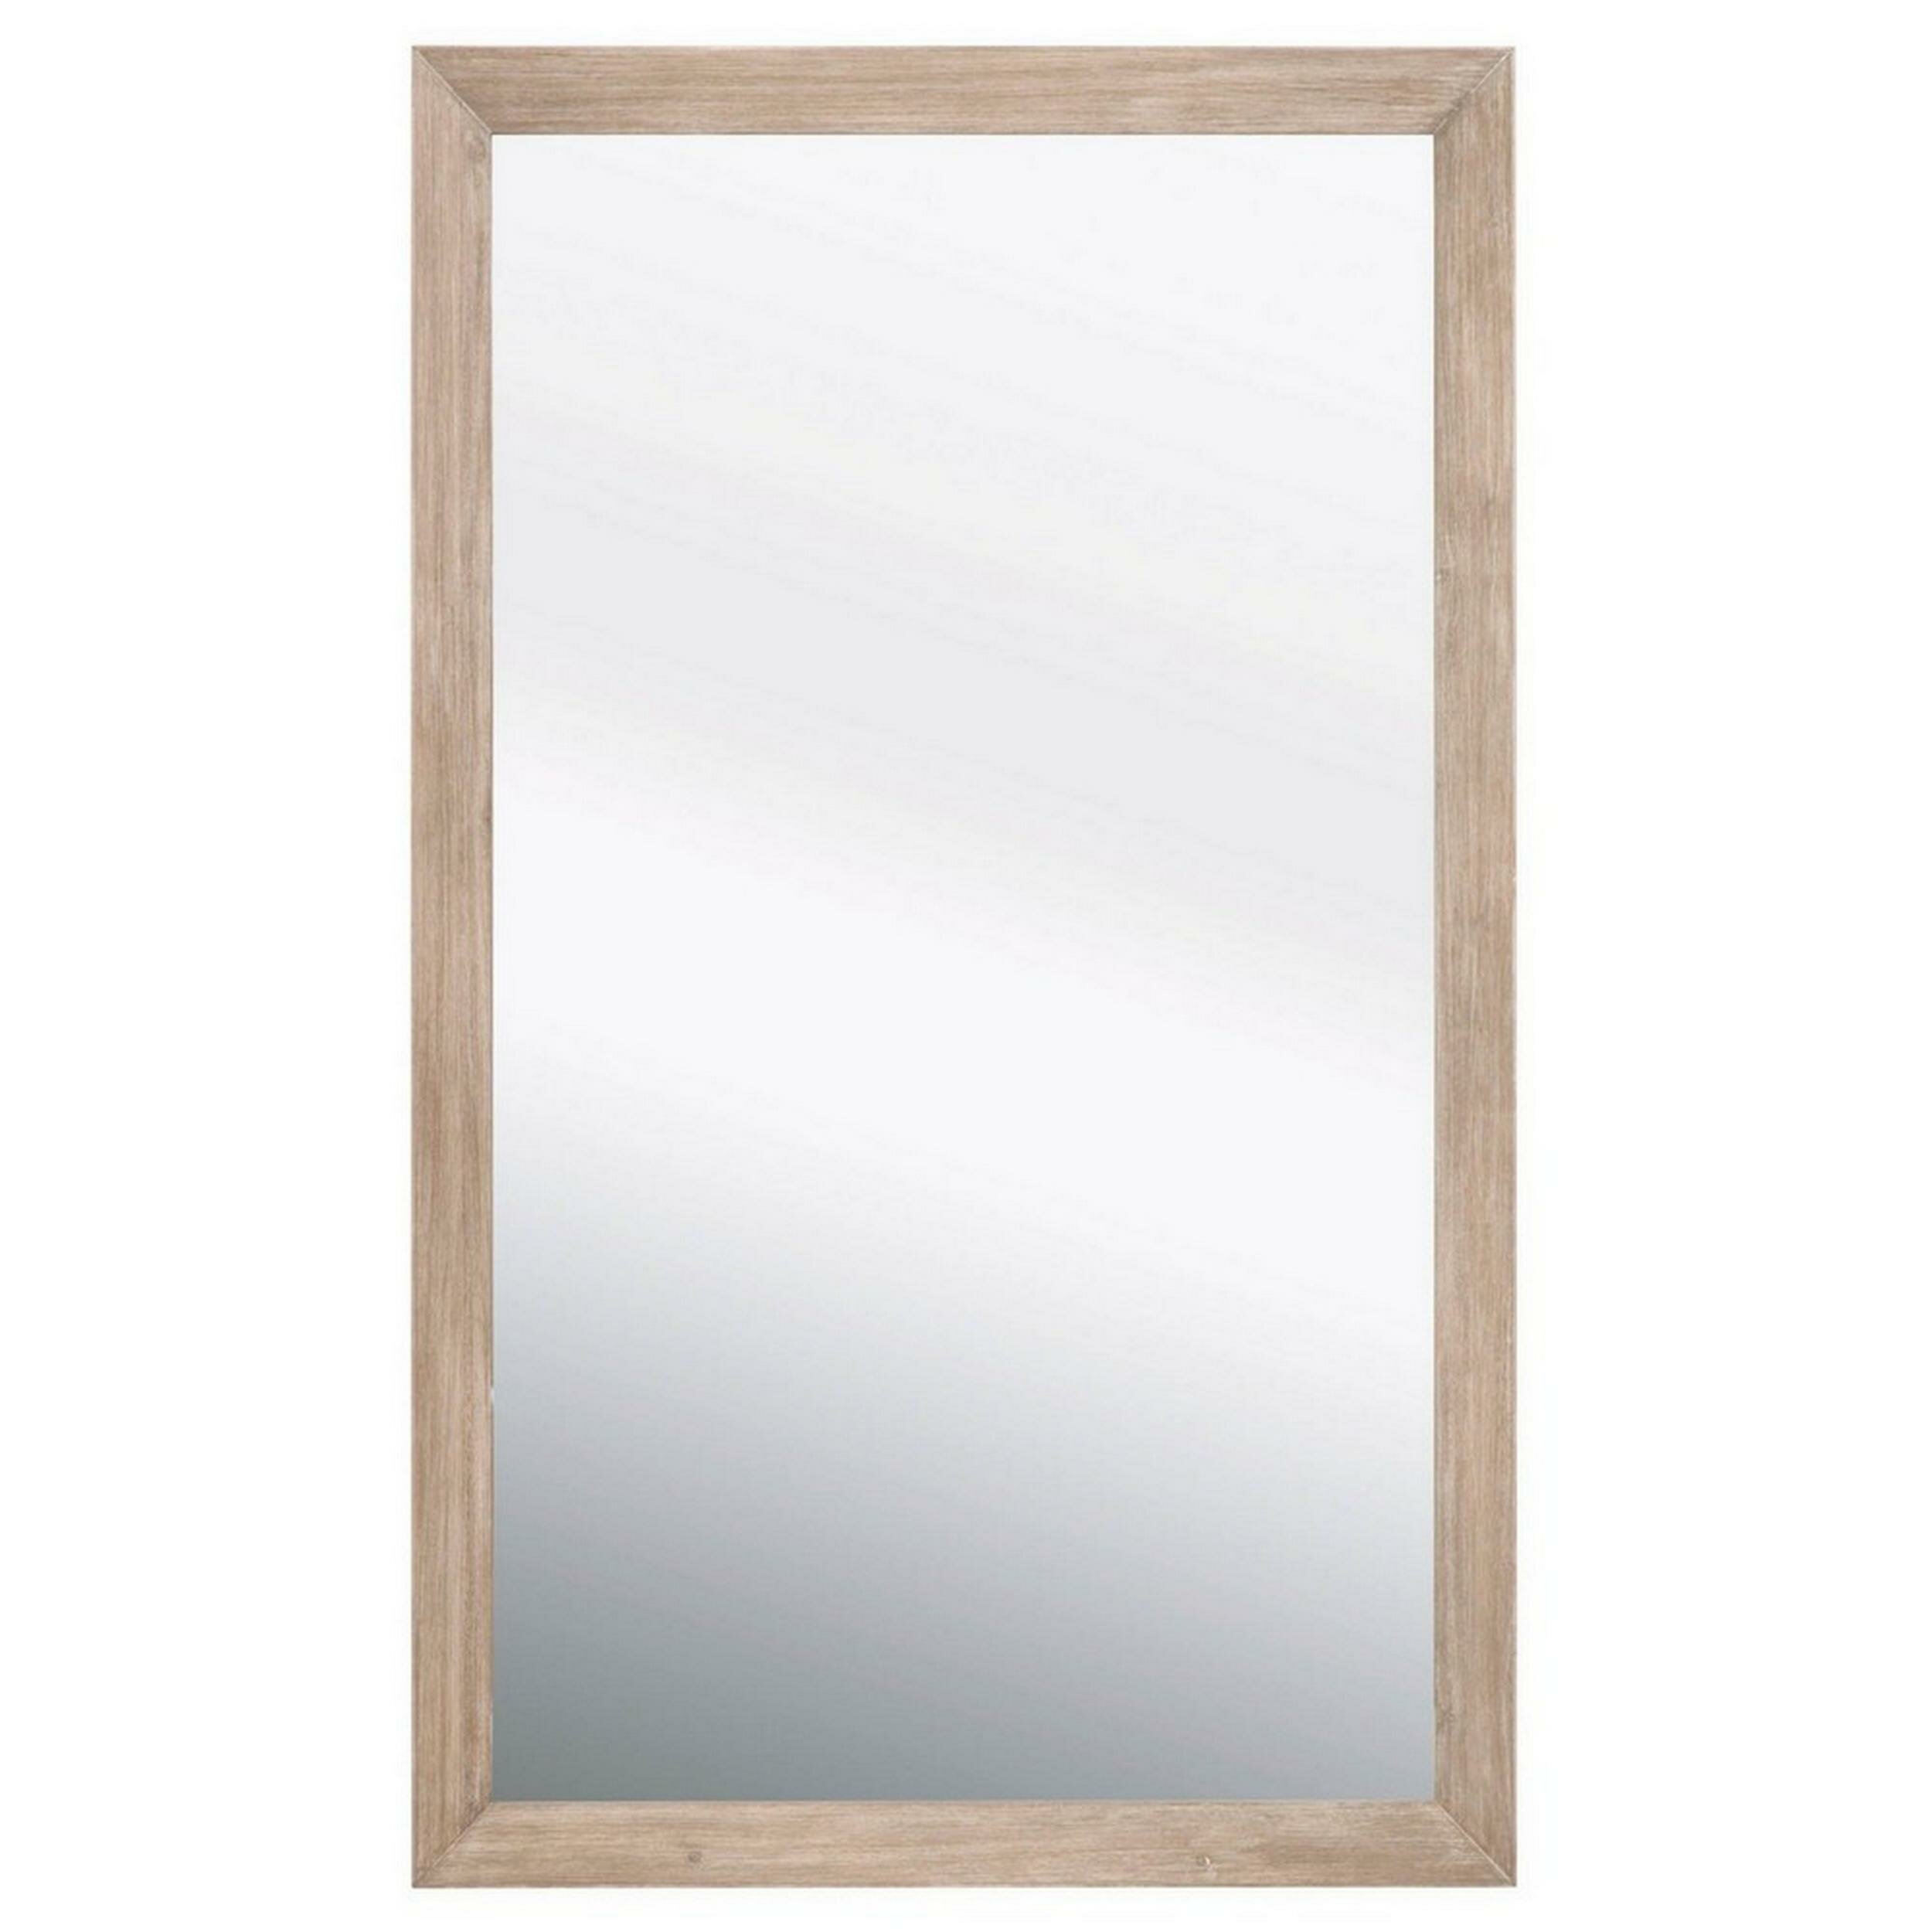 Benjara Transitional Style Mirror with Raised Wooden Frame Brown and Silver 